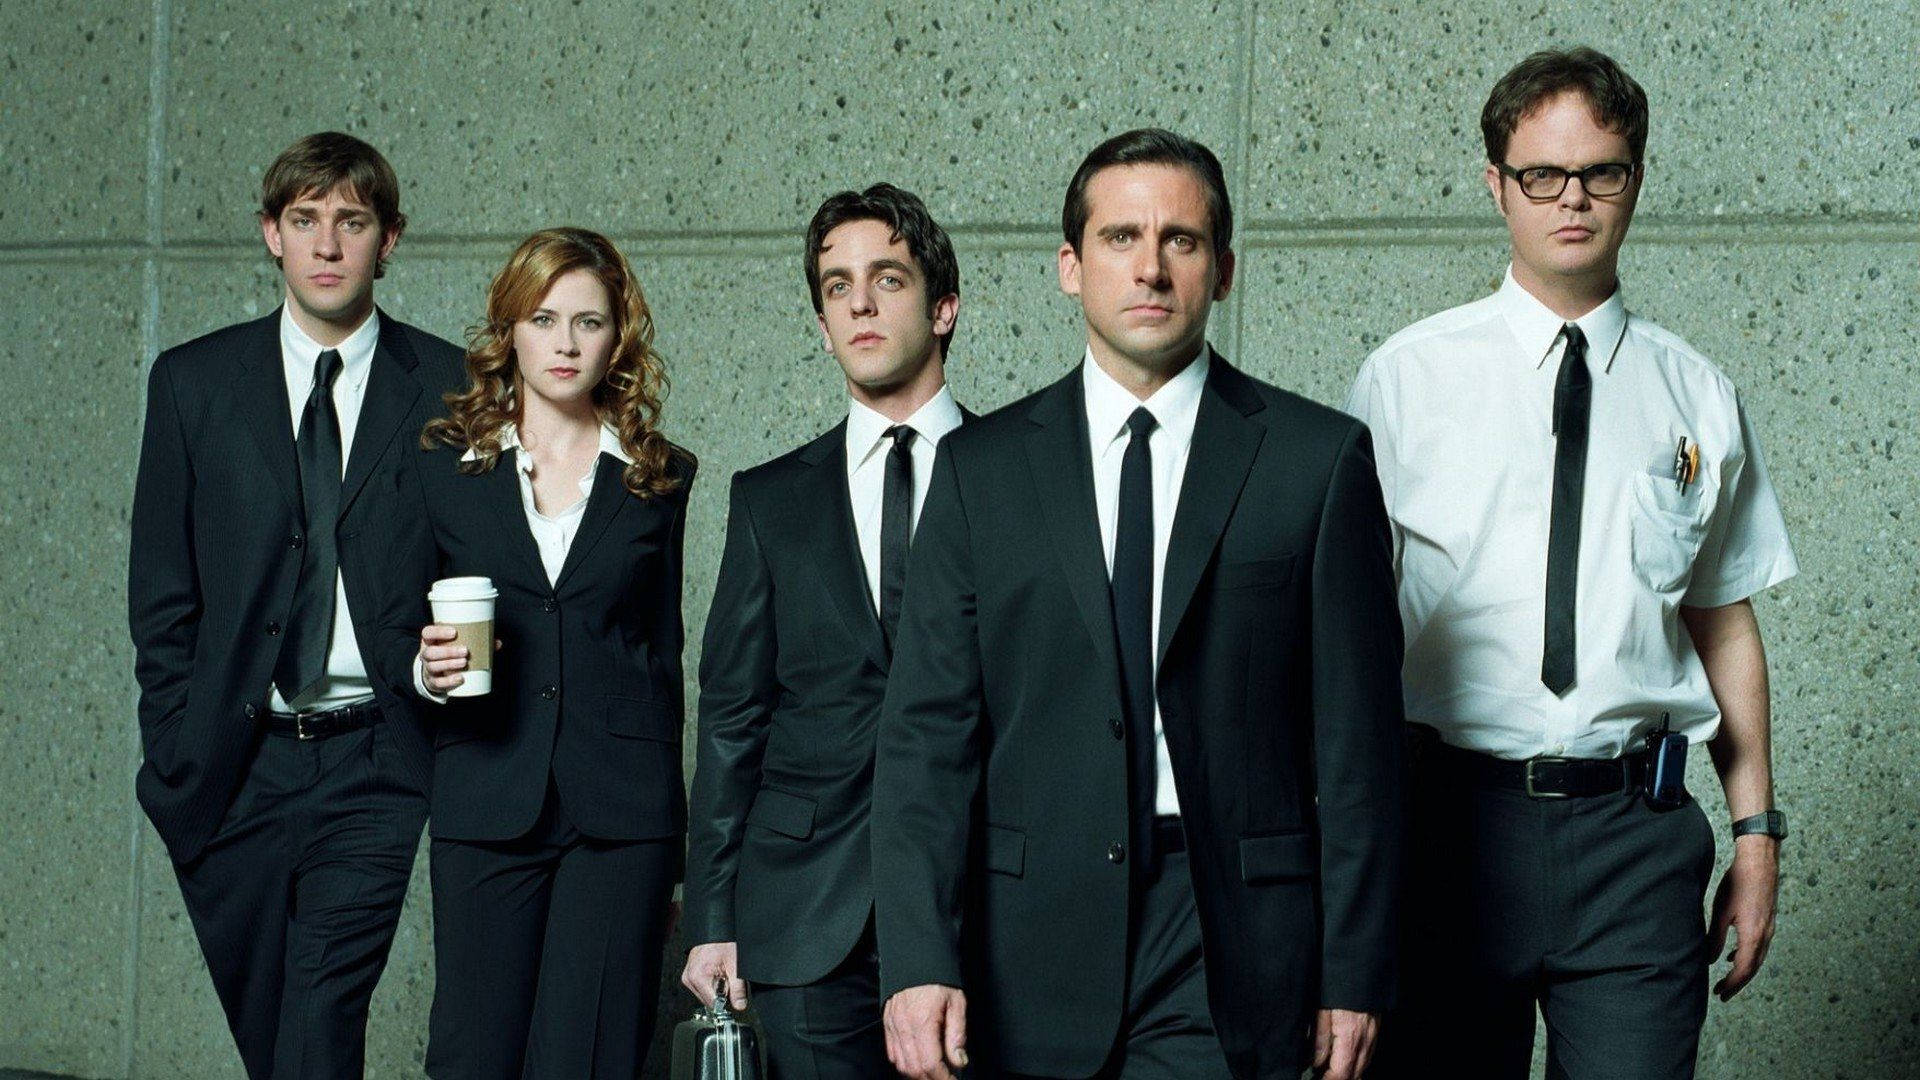 The Office Cast In Suit Wallpaper